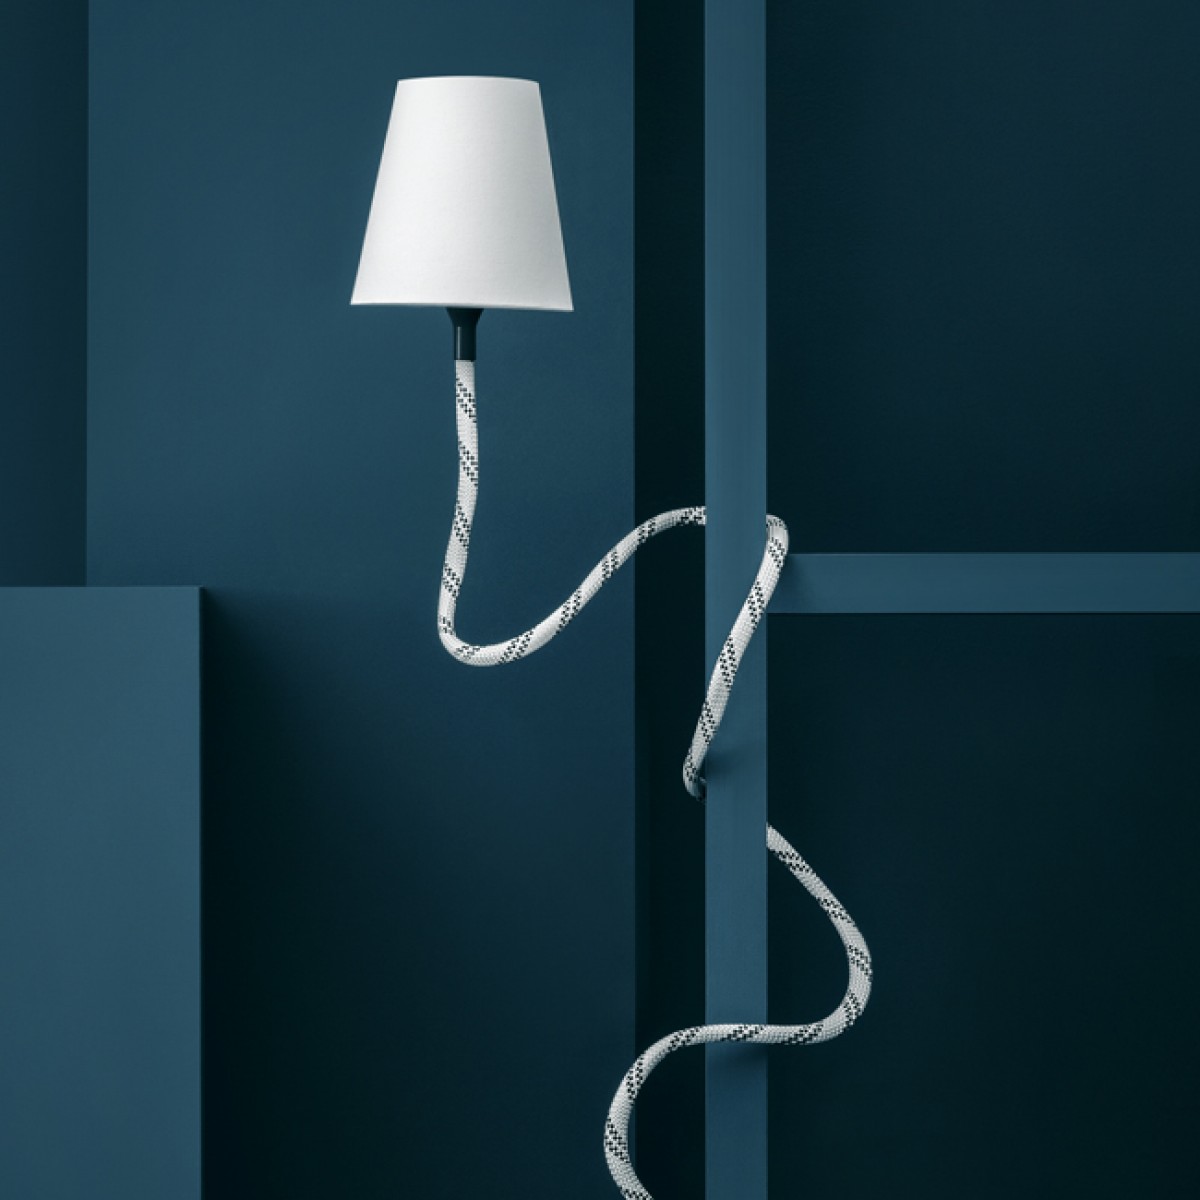 son of nils climbing Lampe - weisses Kabel